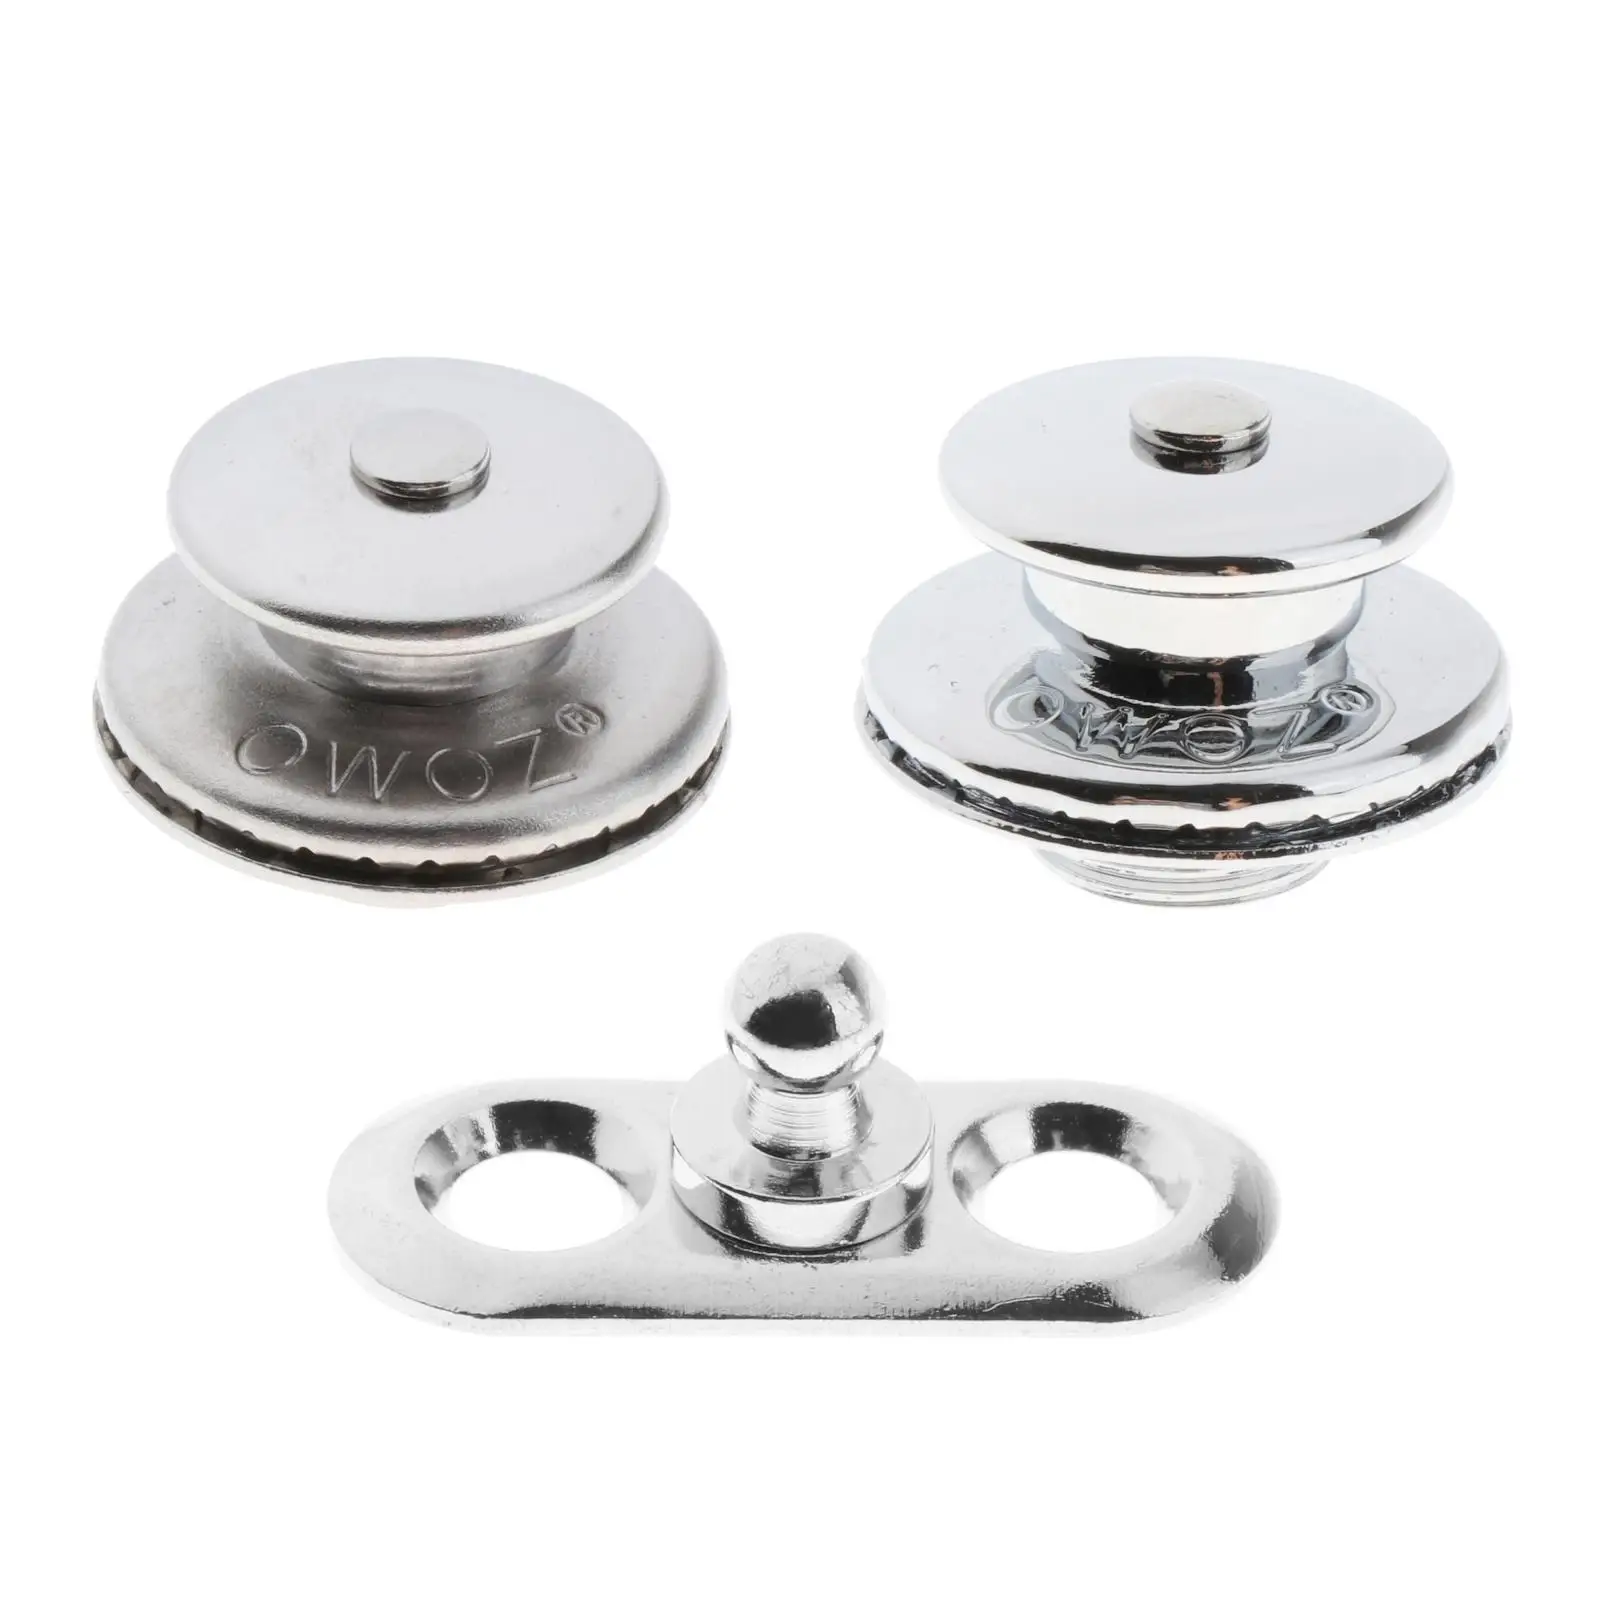 Stainless Steel Yacht Screw Base Snaps Corrosion Resistance Silver Practical